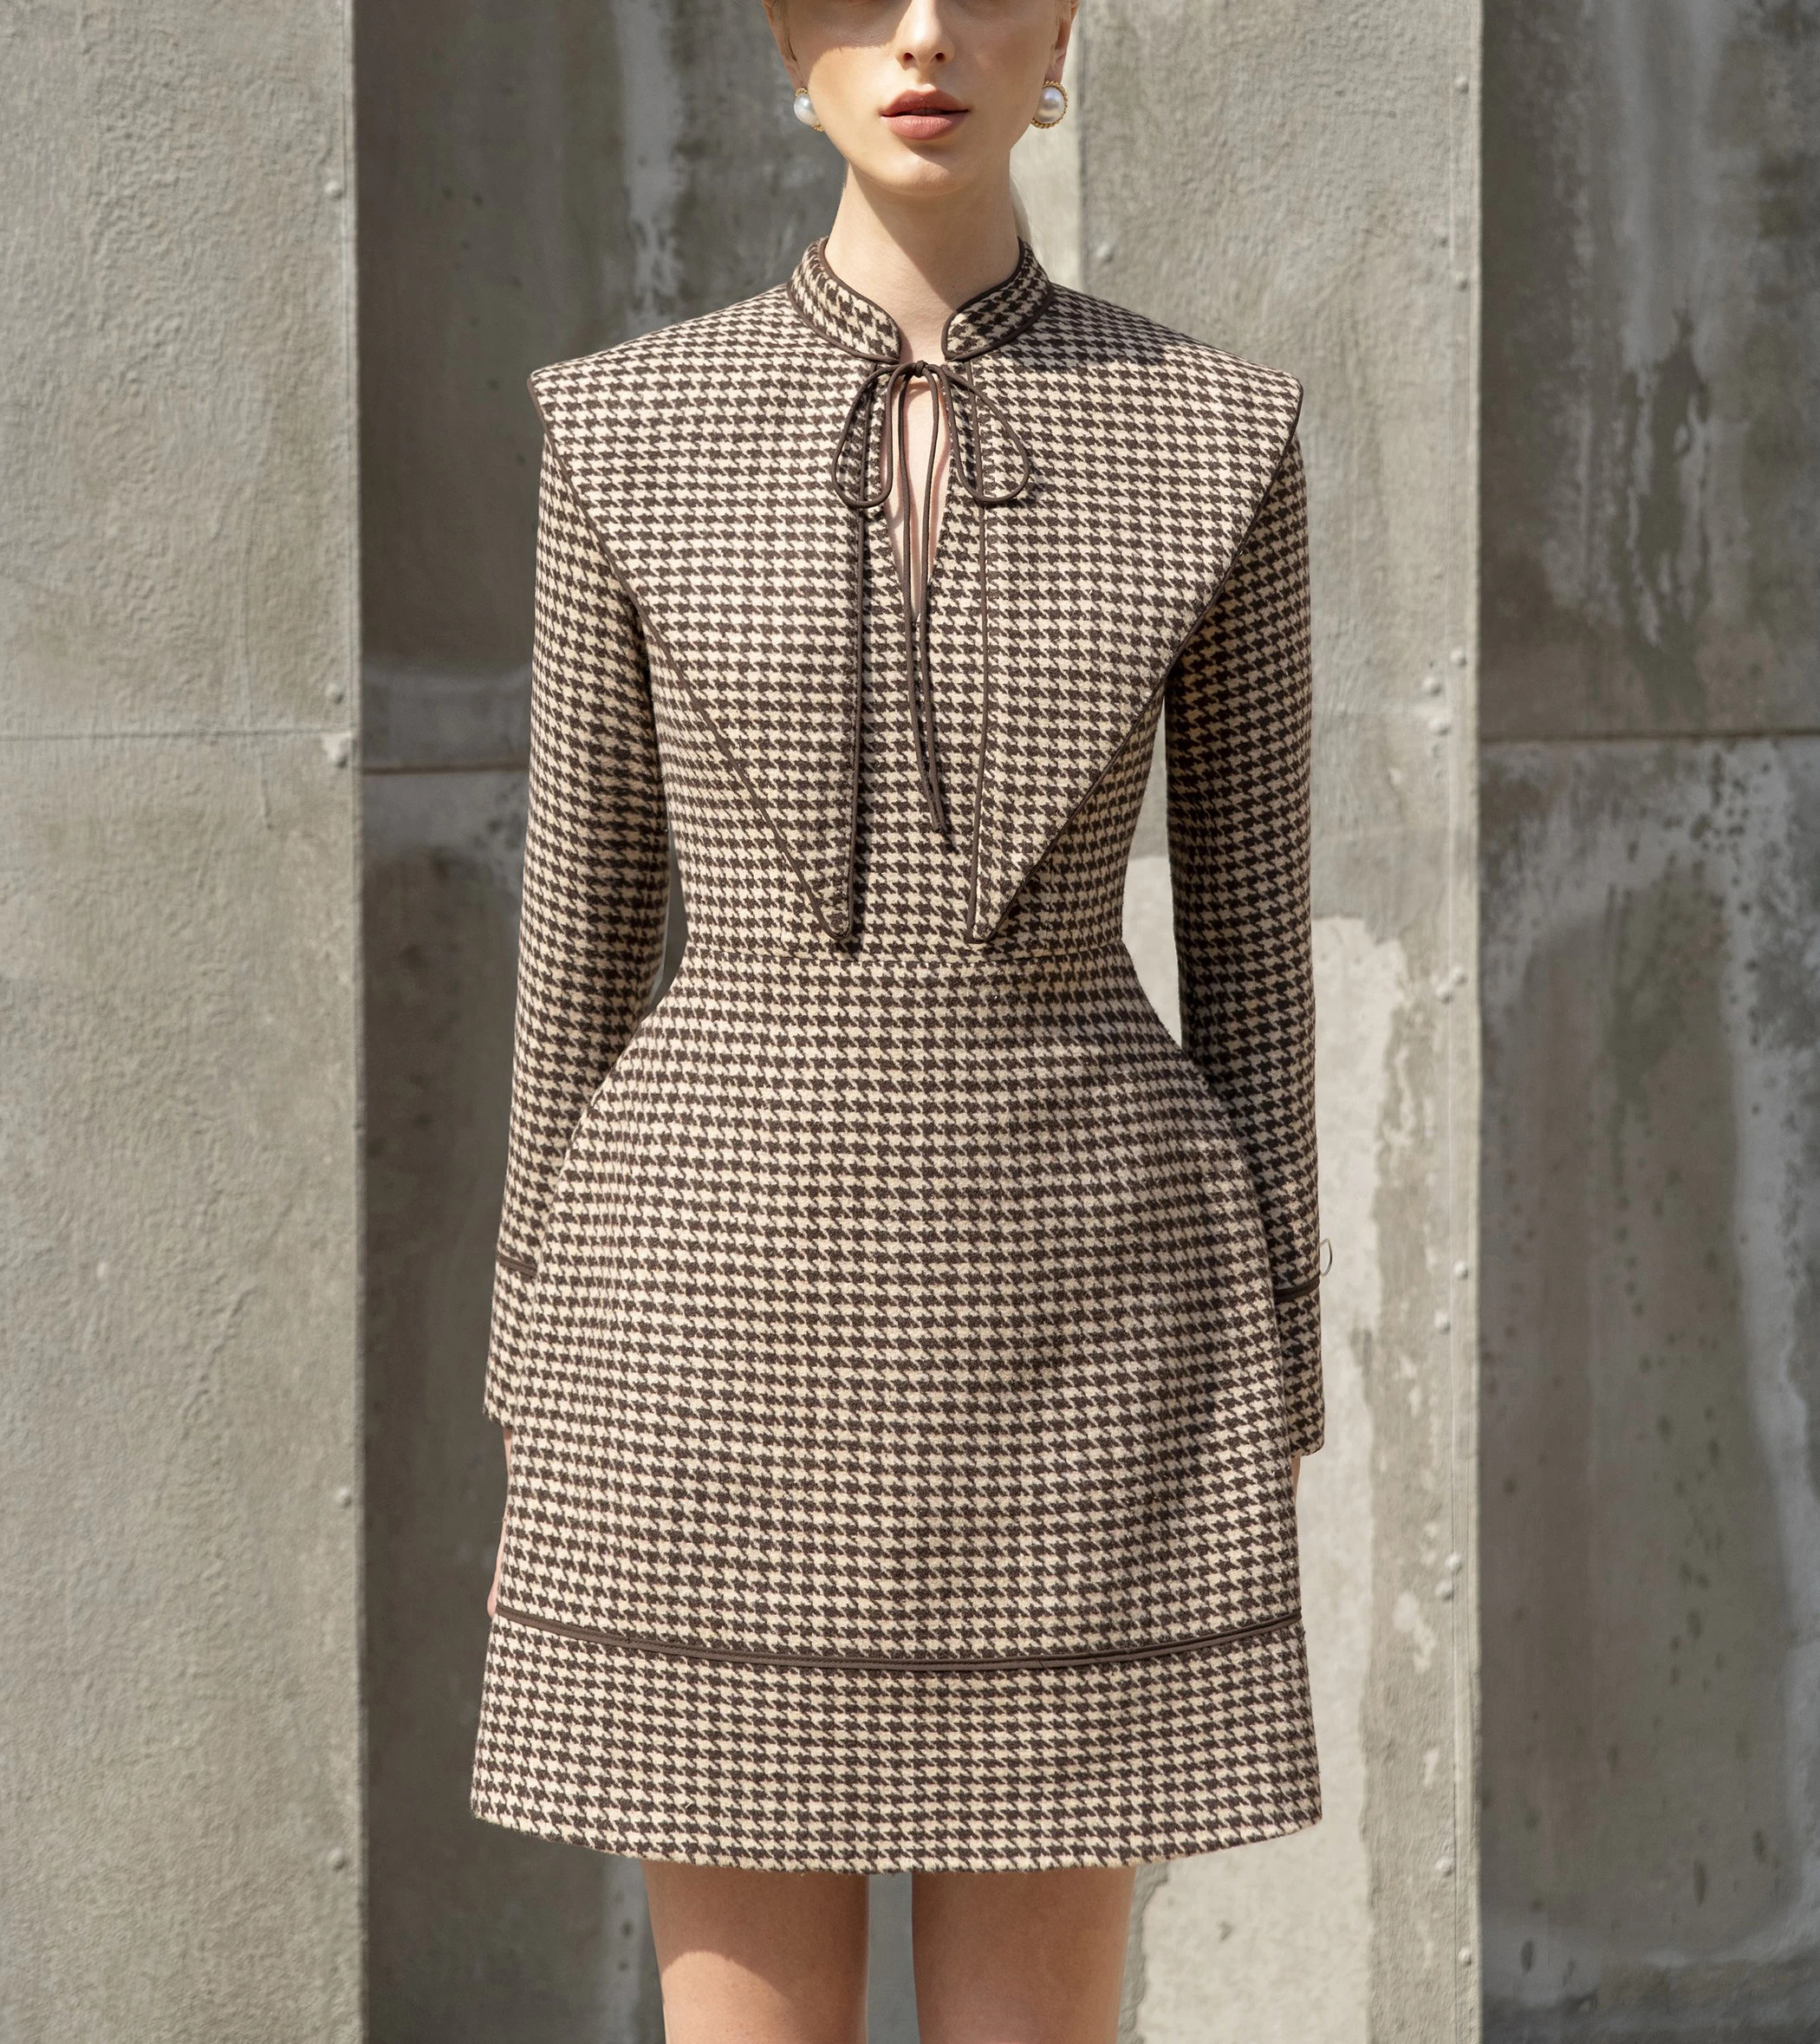 

Tailor Shop Retro Slim and Thin Dark Brown Houndstooth Winter Female Light Luxury Dress Semi-Formal Bridal Party Dresses